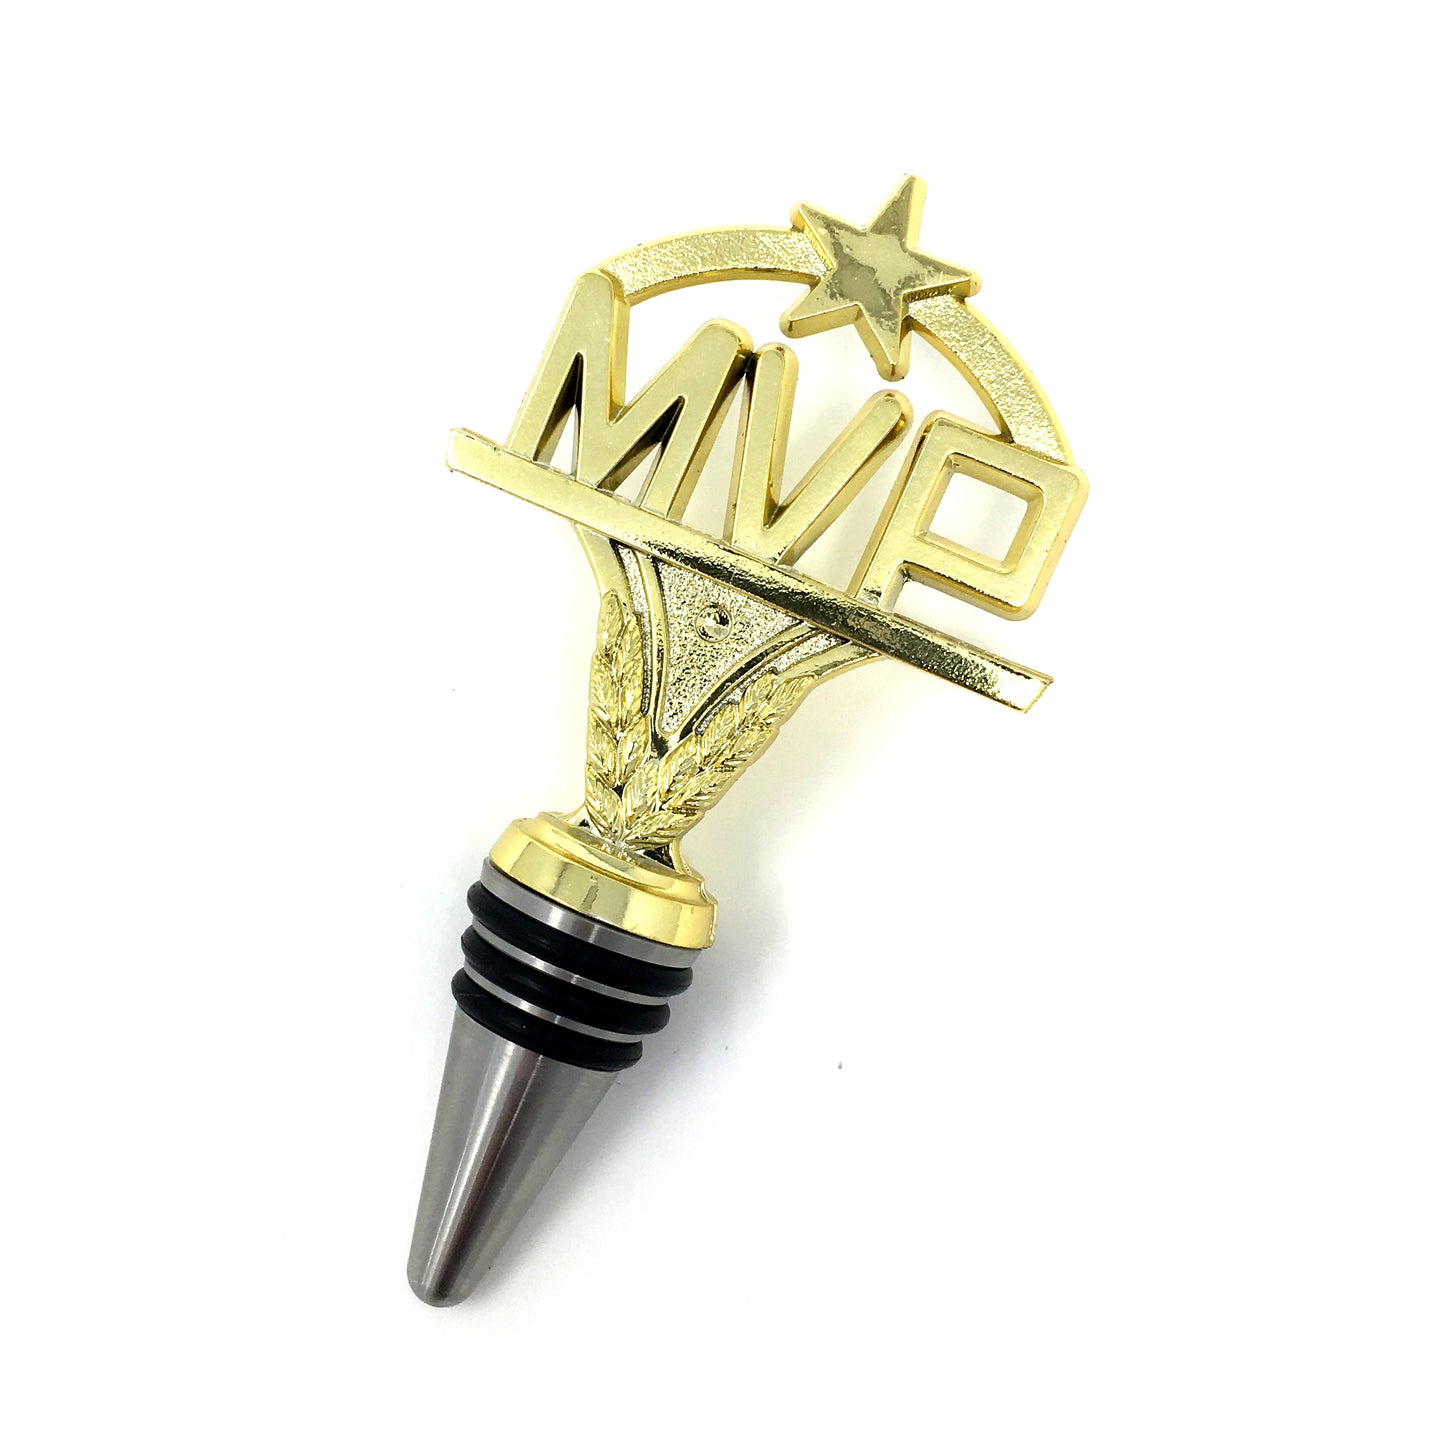 MVP Trophy Wine Bottle Stopper with Stainless Steel Base